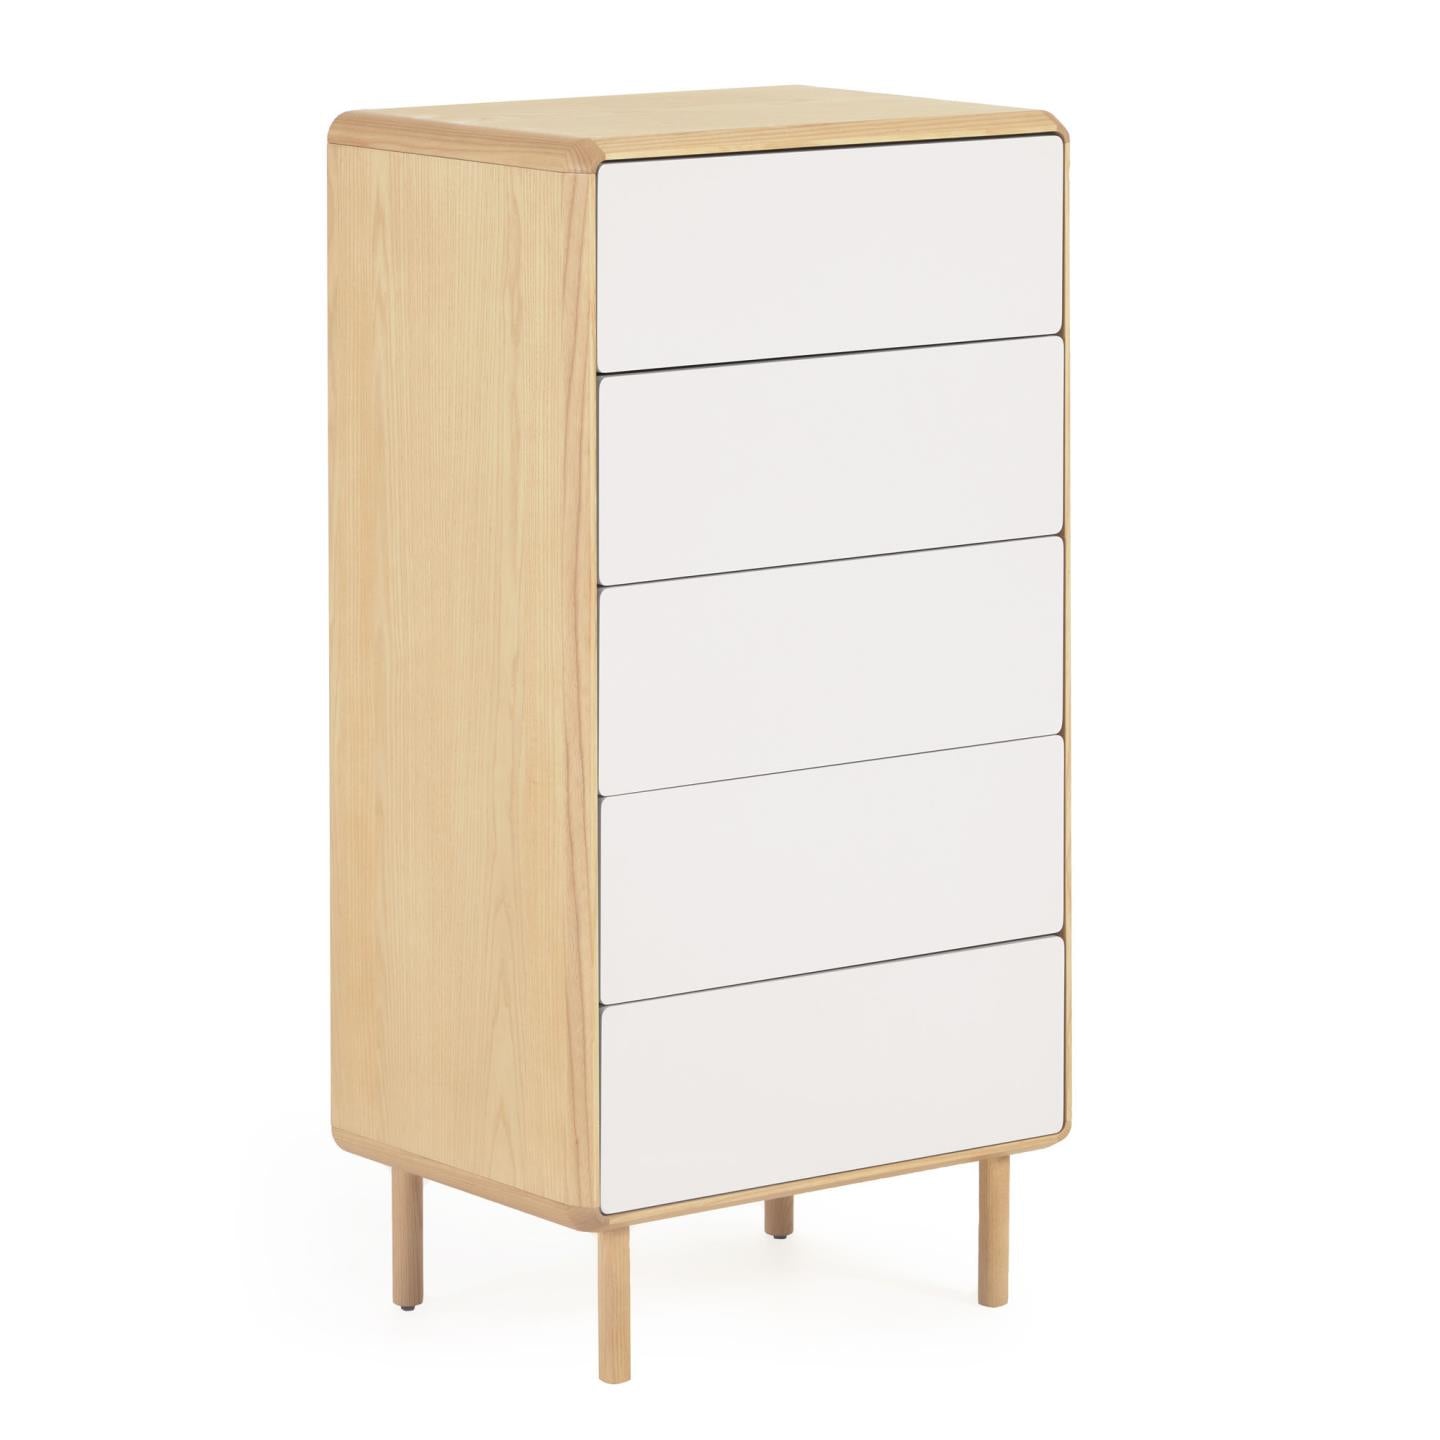 Anielle solid and ash veneer chest of five drawers 60 x 117 cm